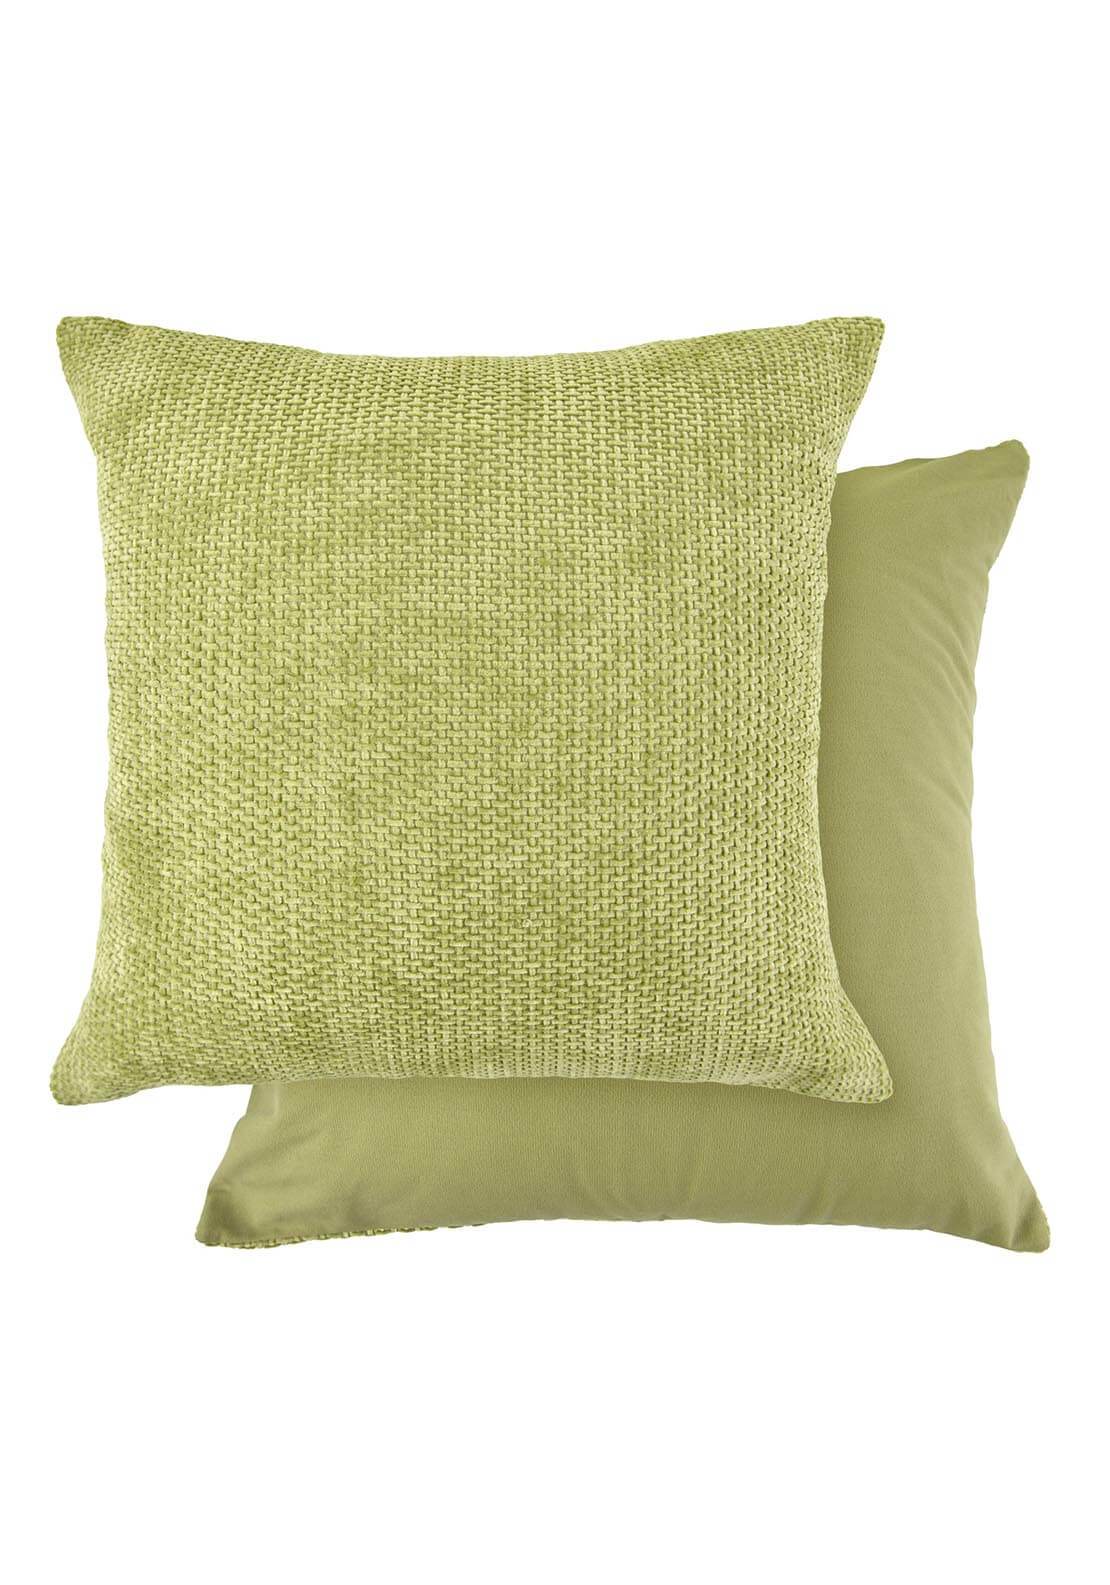 The Home Collection Portland Cushion 17&quot; x 17&quot; - Sage Green 2 Shaws Department Stores